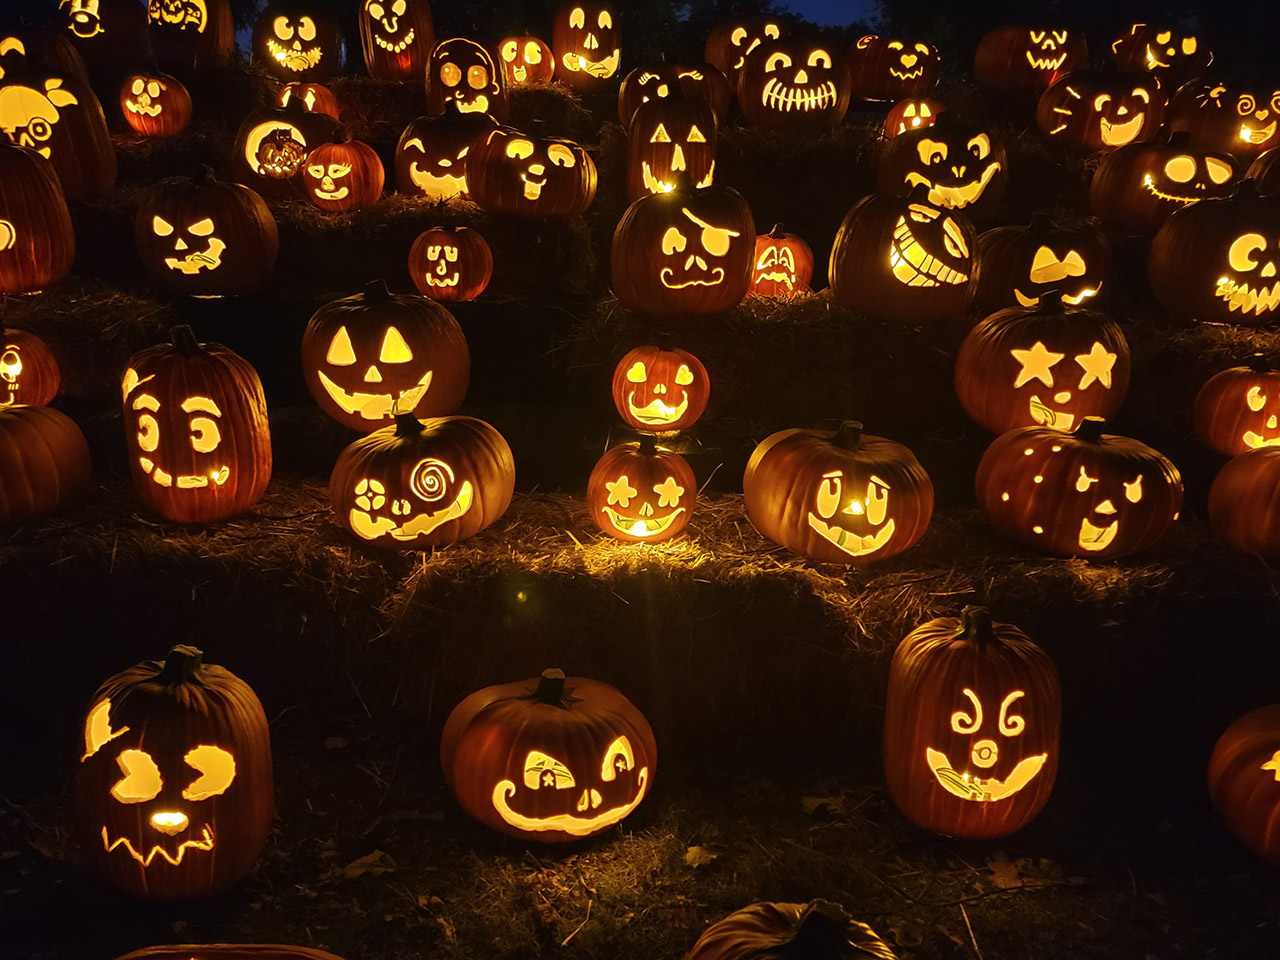 A large group of pumpkins with faces carved into them for Halloween in Memphis.